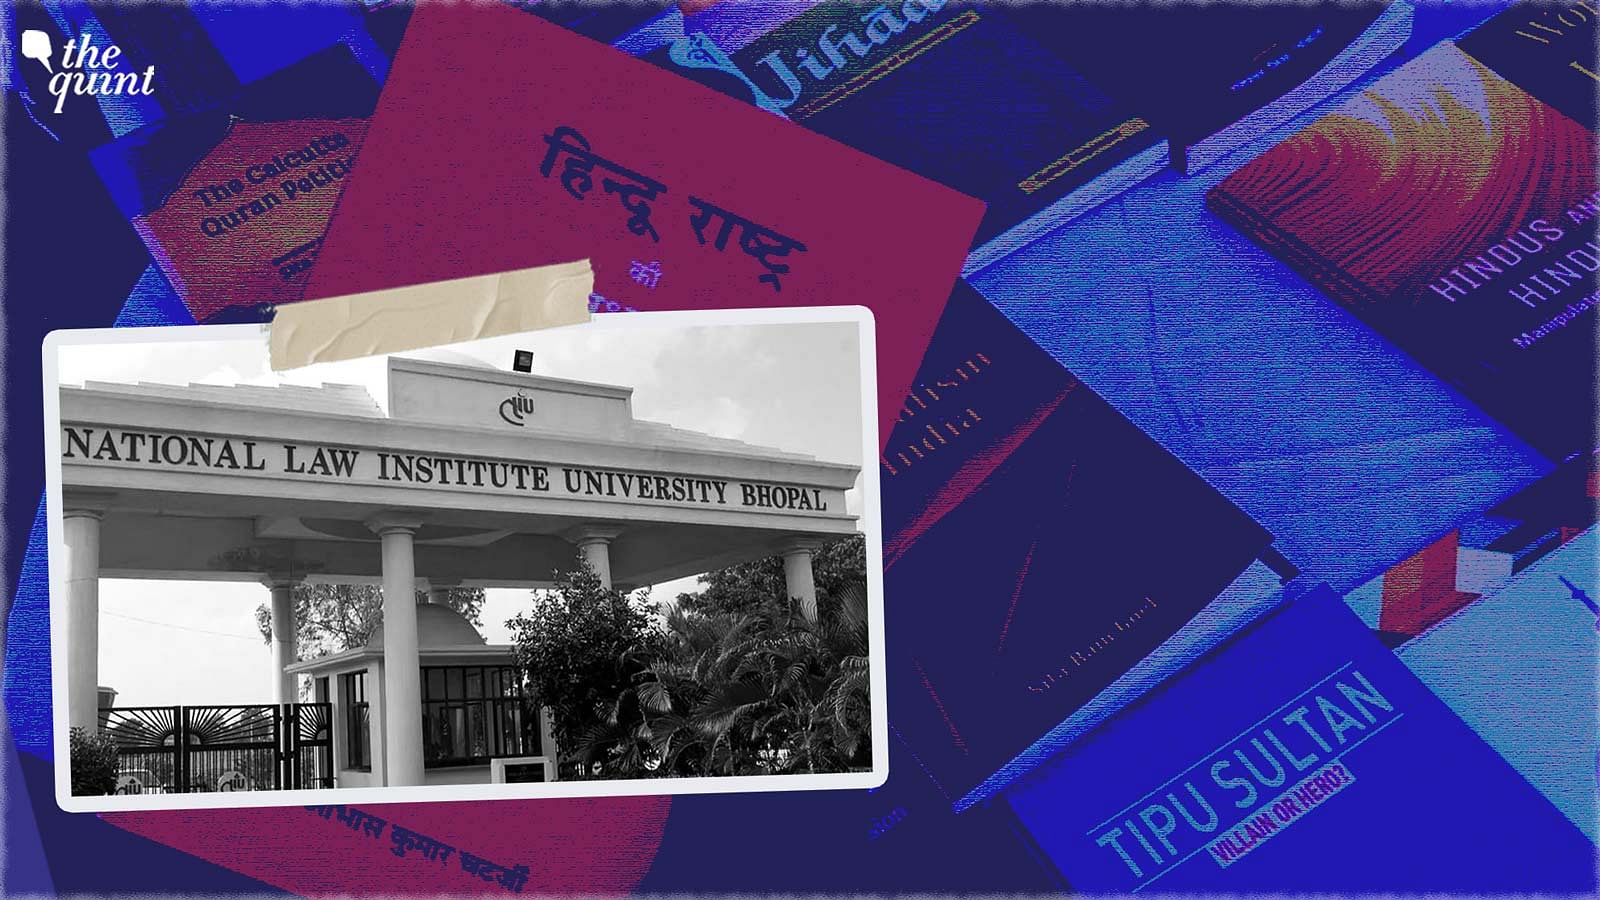 <div class="paragraphs"><p>NLIU students of Bhopal have objected to an event held on their campus.</p></div>